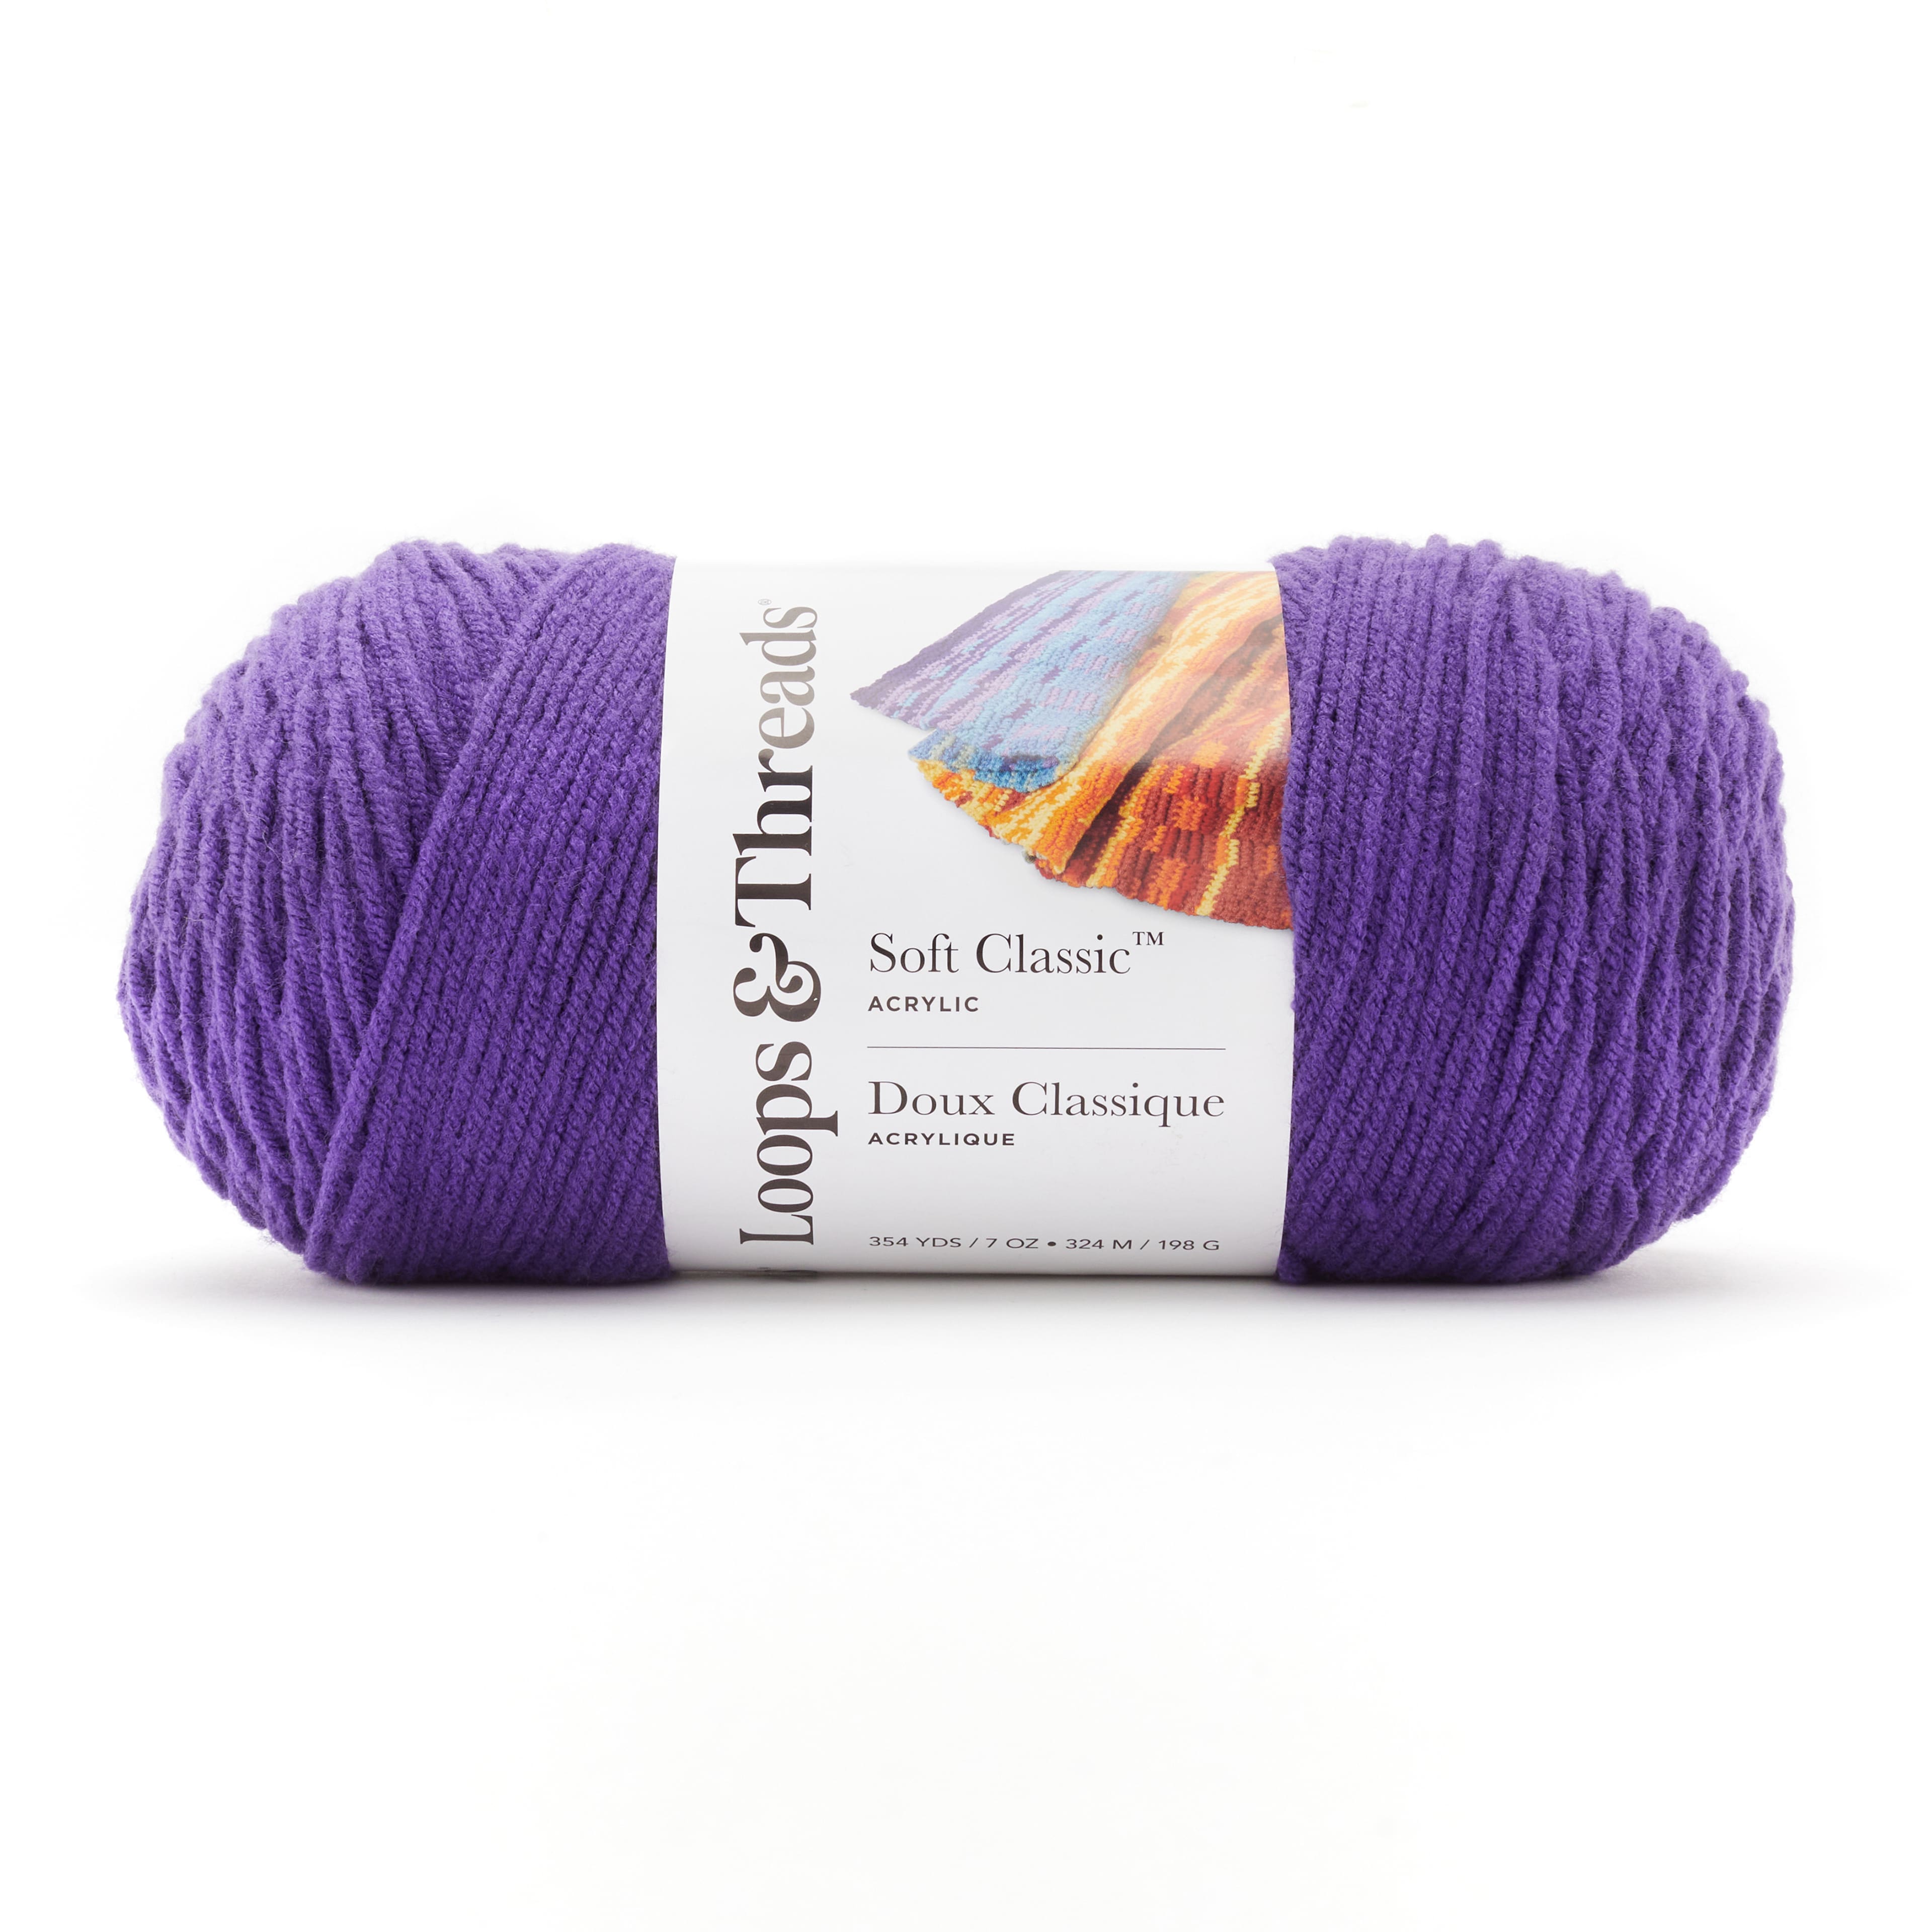 Impeccable™ Solid Yarn by Loops & Threads®, Michaels